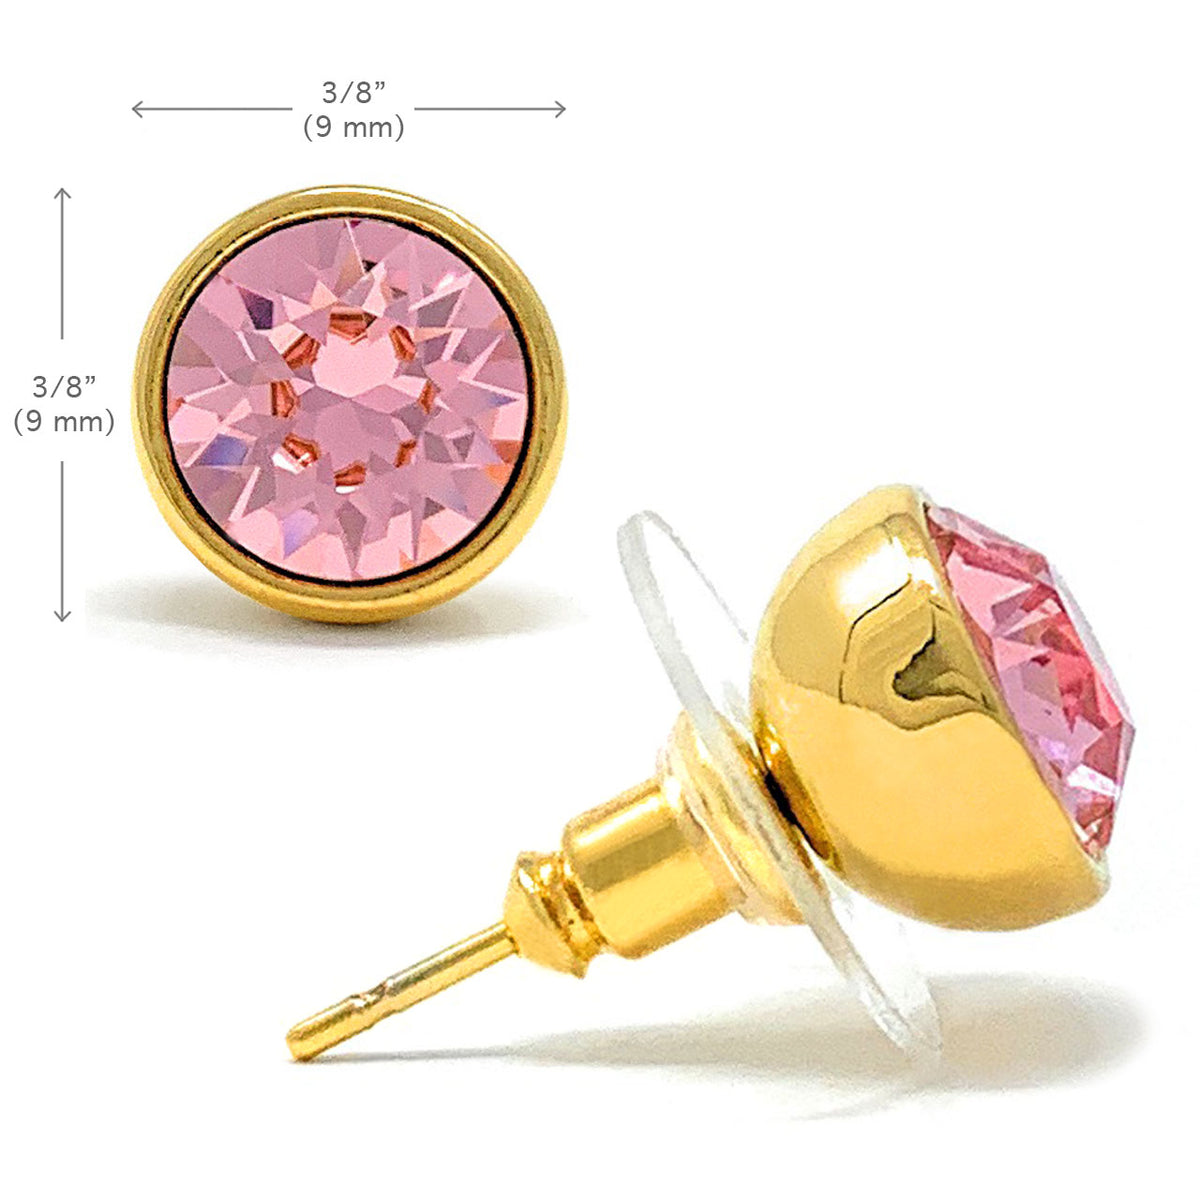 Harley Stud Earrings with Pink Light Rose Round Crystals from Swarovski Gold Plated - Ed Heart